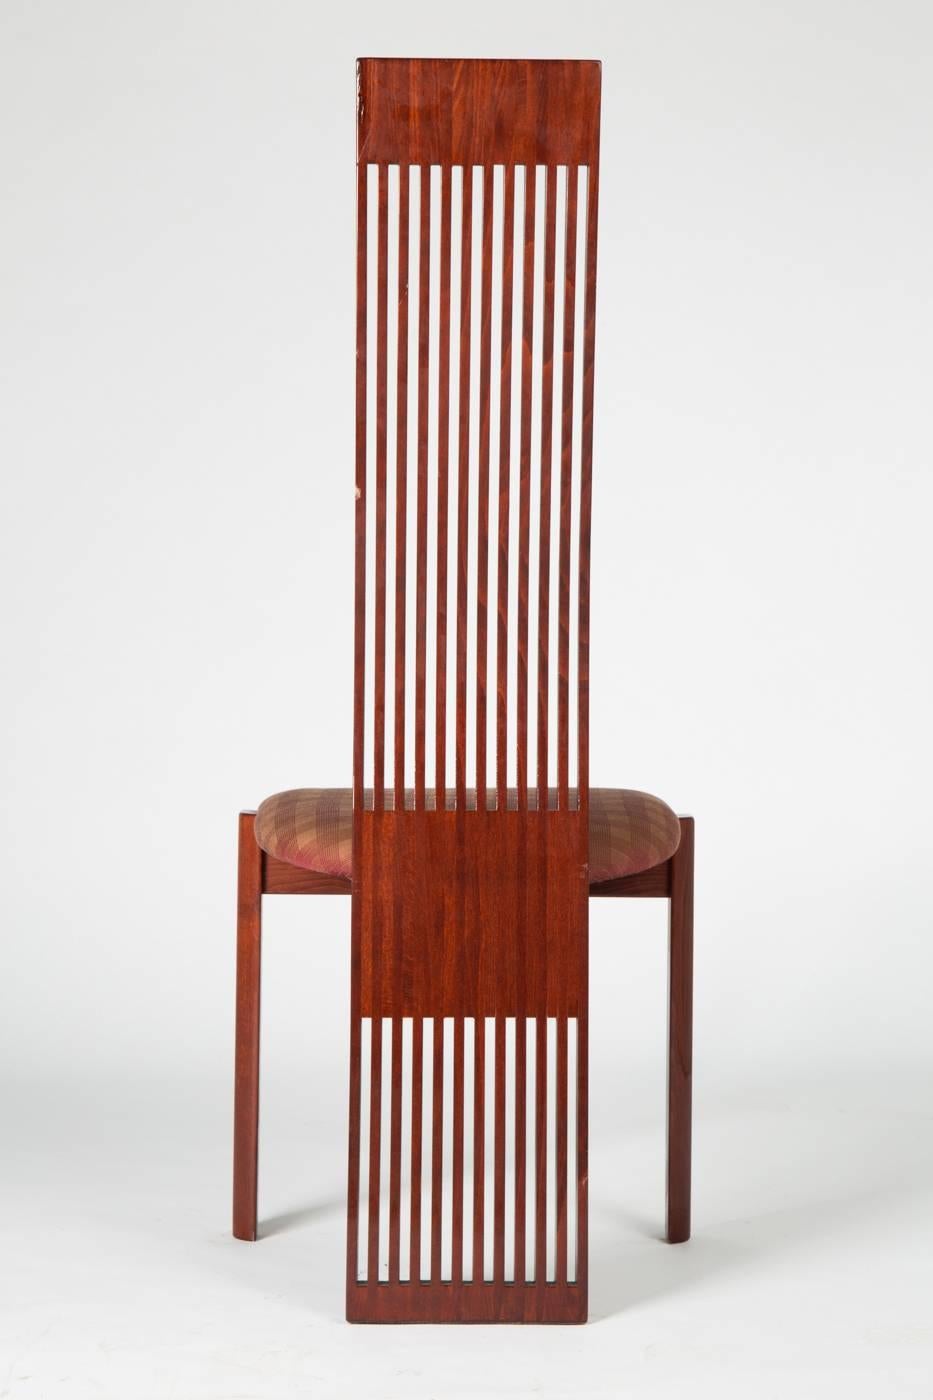 High back chair by Pietro Constantini, Italy, 1970s. Underside with manufacturer label.